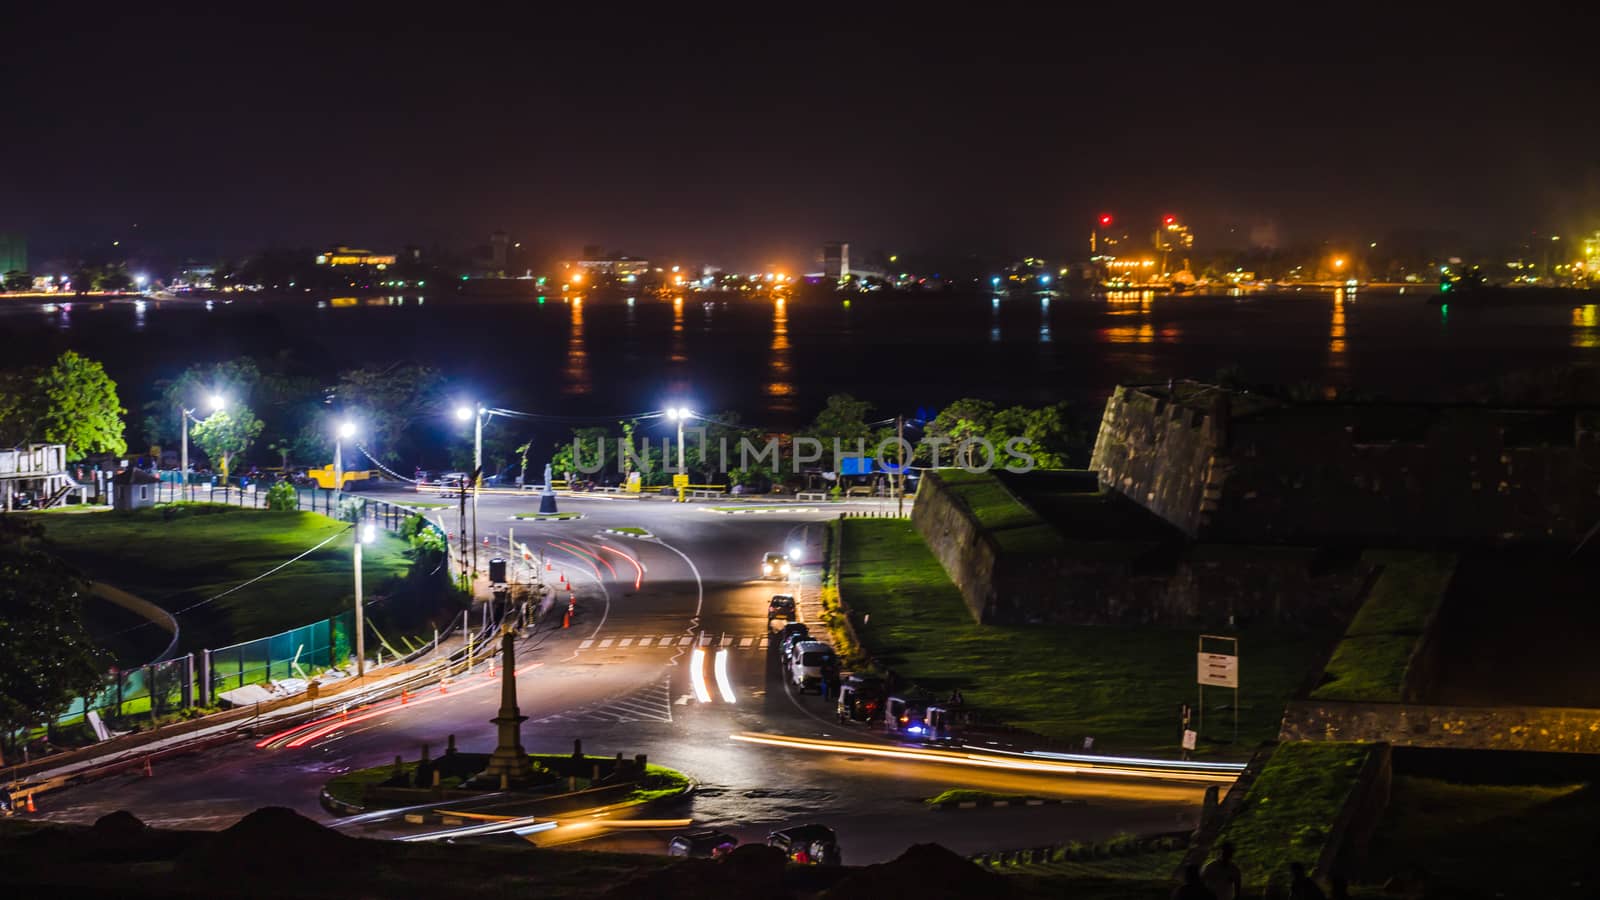 Taken from on top of Galle fort, view of the streets long exposure night photography